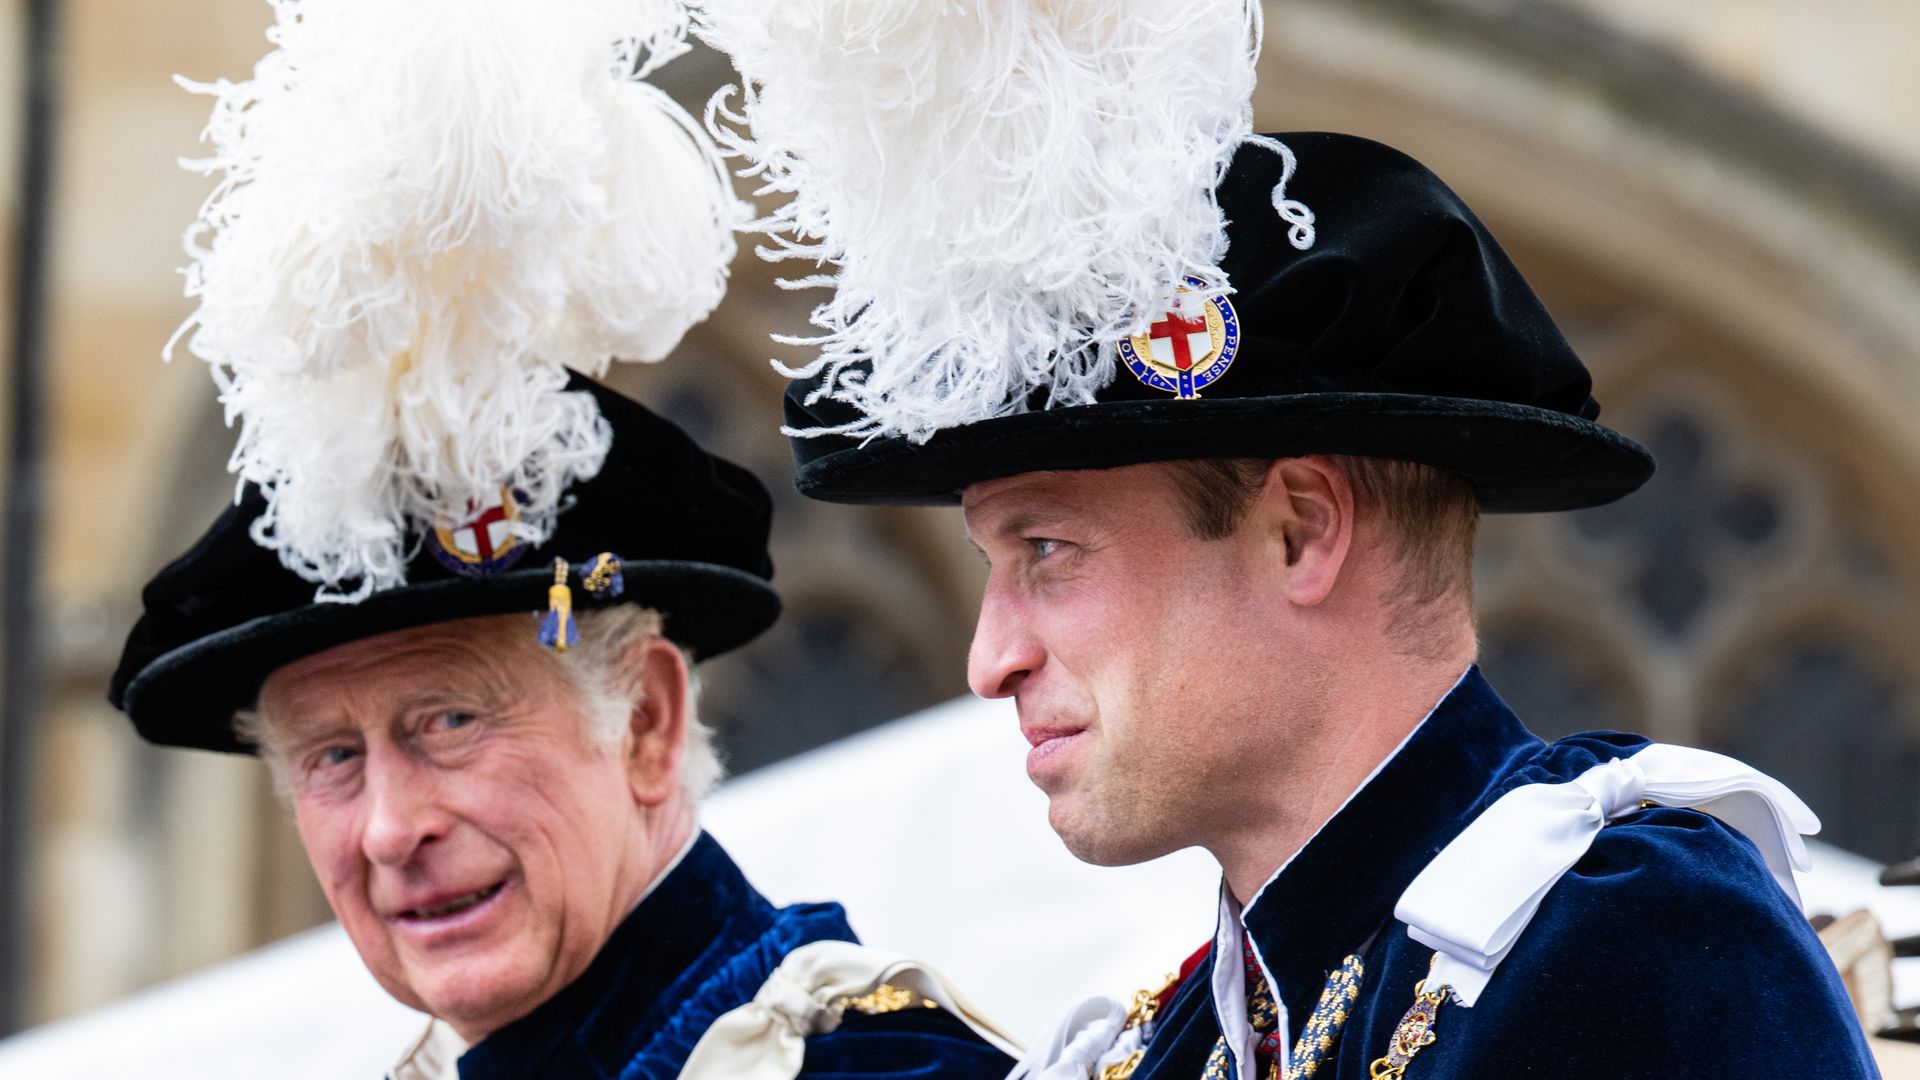 King Charles and Prince William in feathered hats